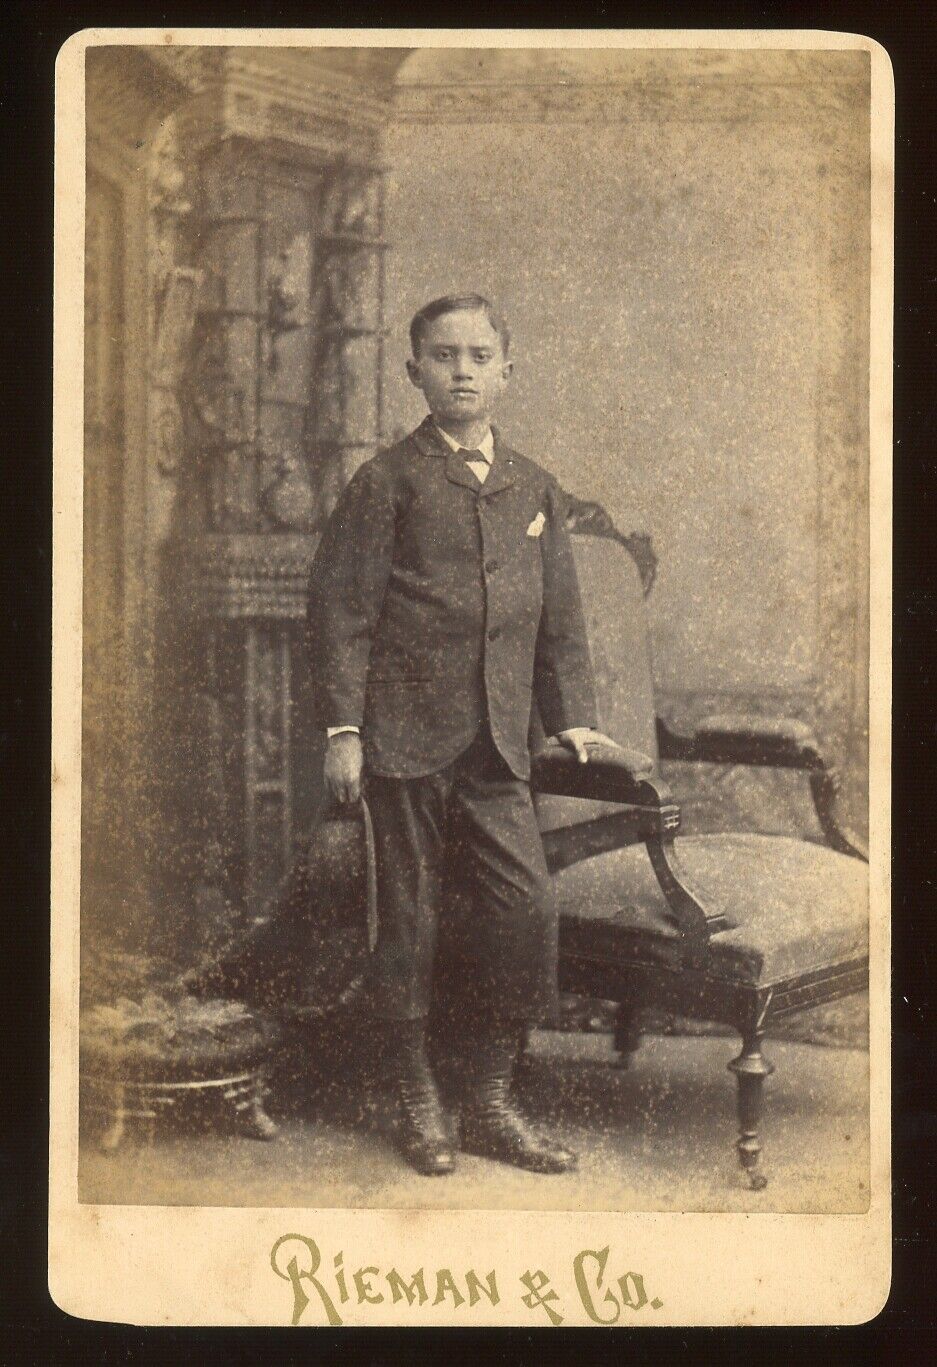 CA, San Francisco. CABINET PHOTO showing a HANDSOME BOY